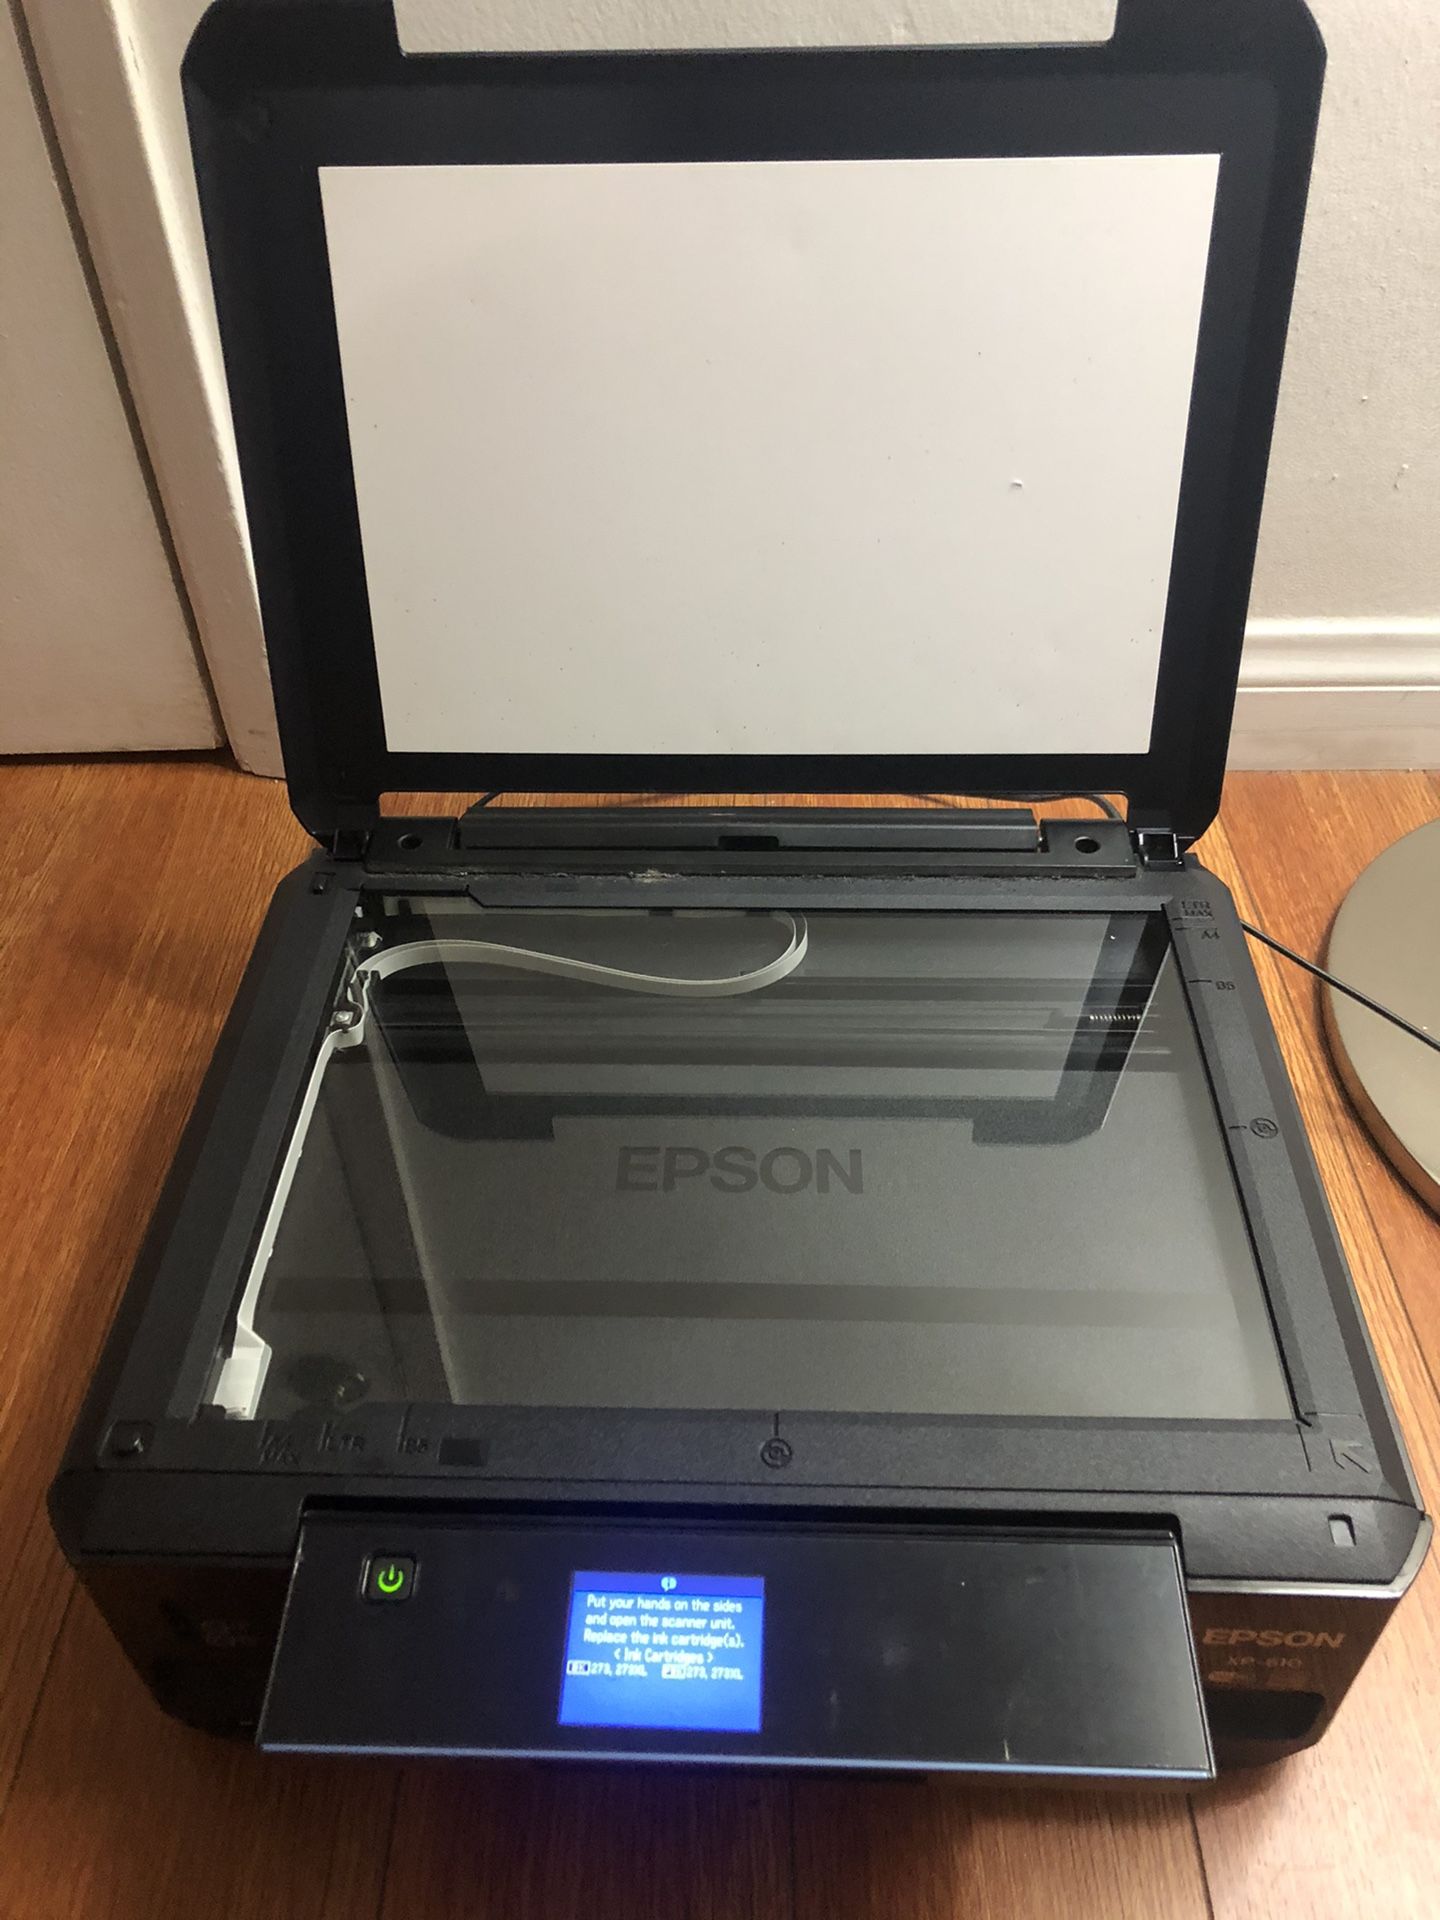 Epson XP-610 Small-in-One All-in-One Printer/scan/copy